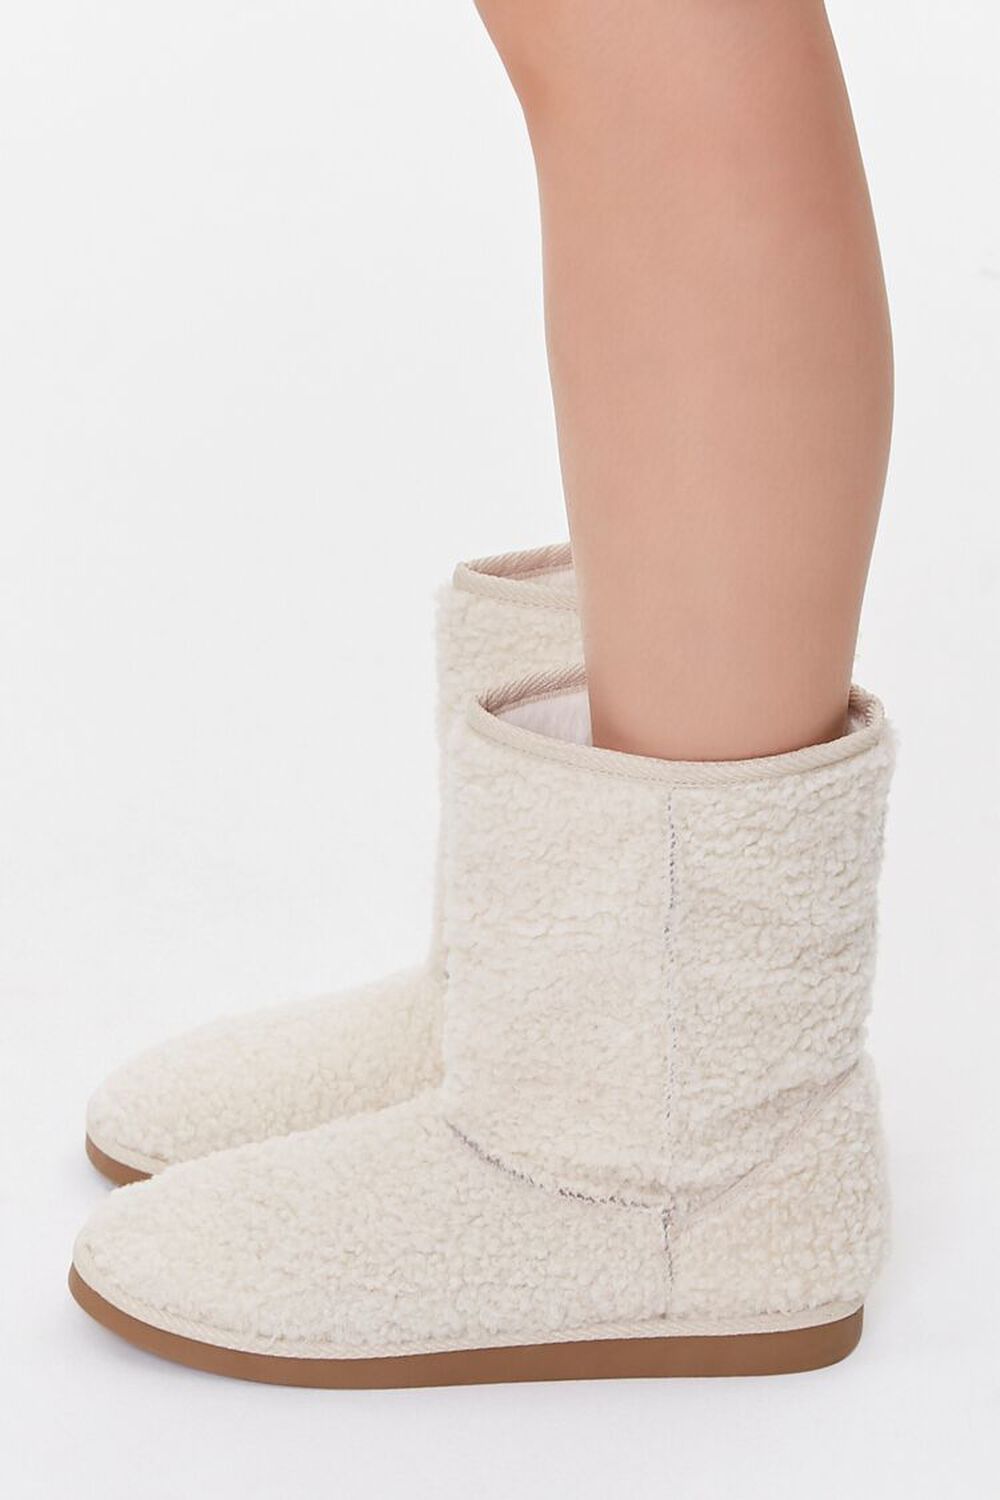 CREAM Faux Shearling Slip-On Booties, image 2